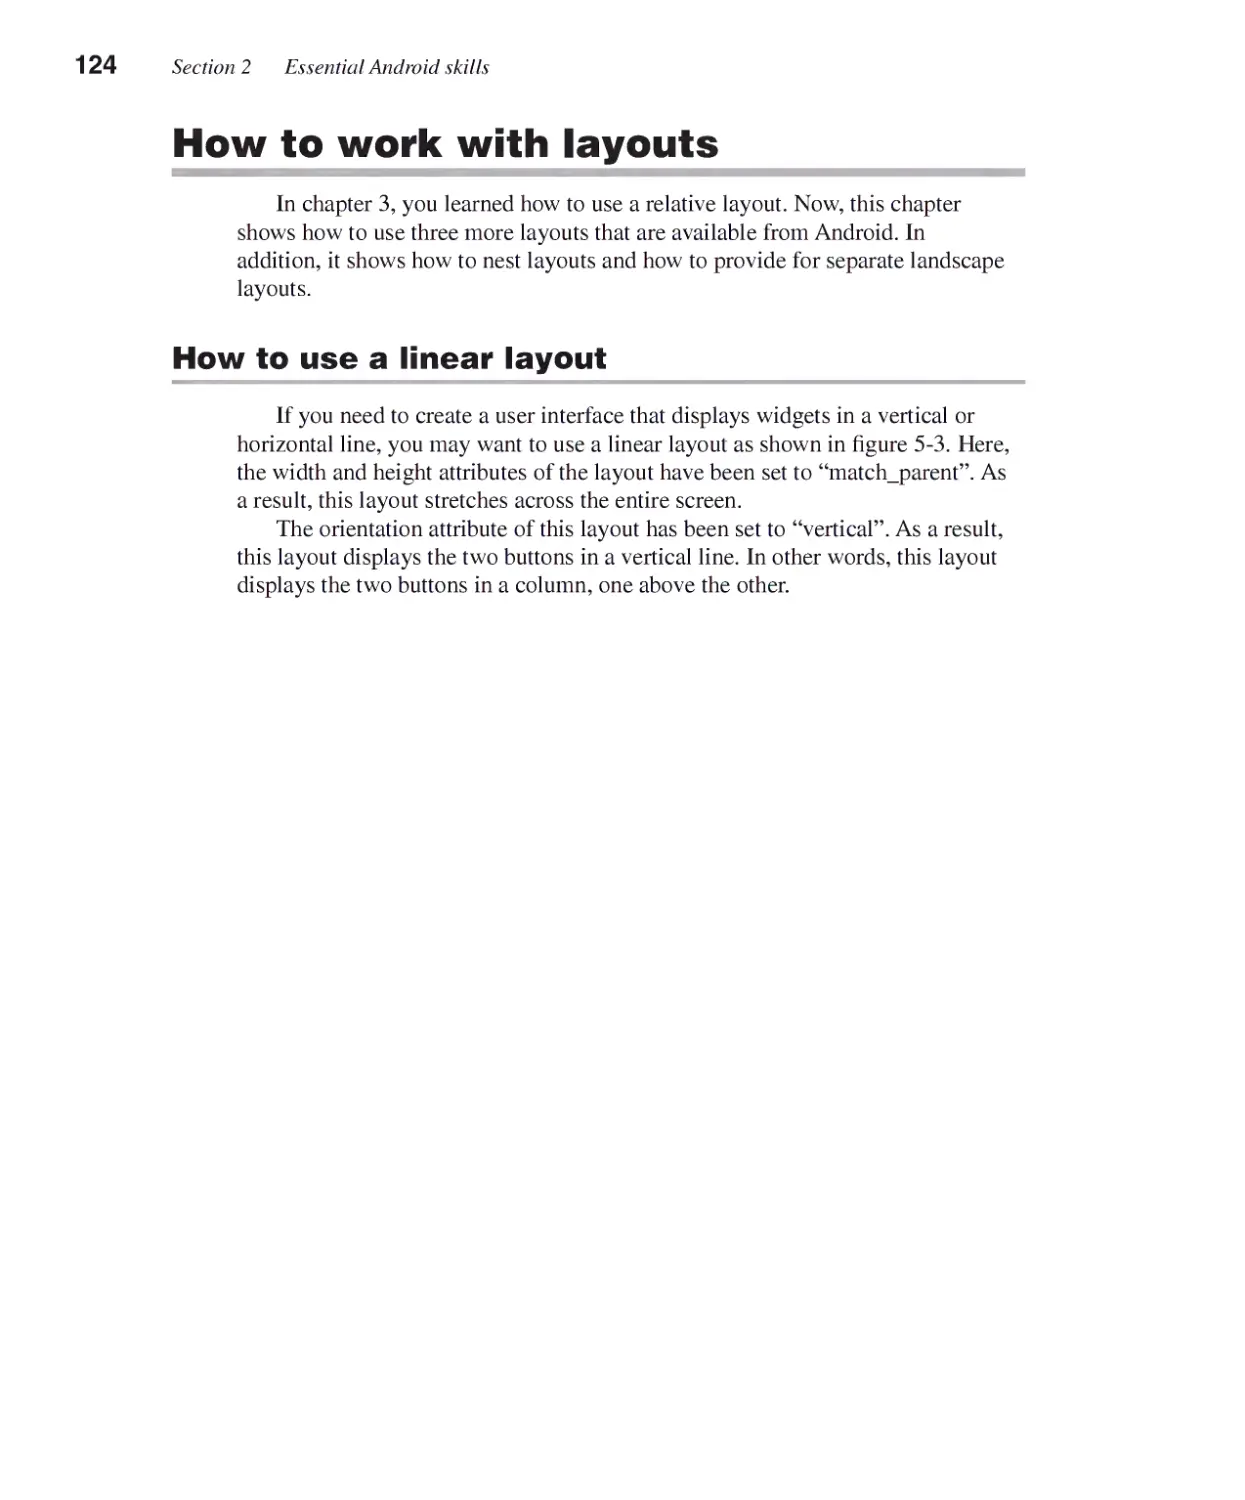 How to Work with Layouts